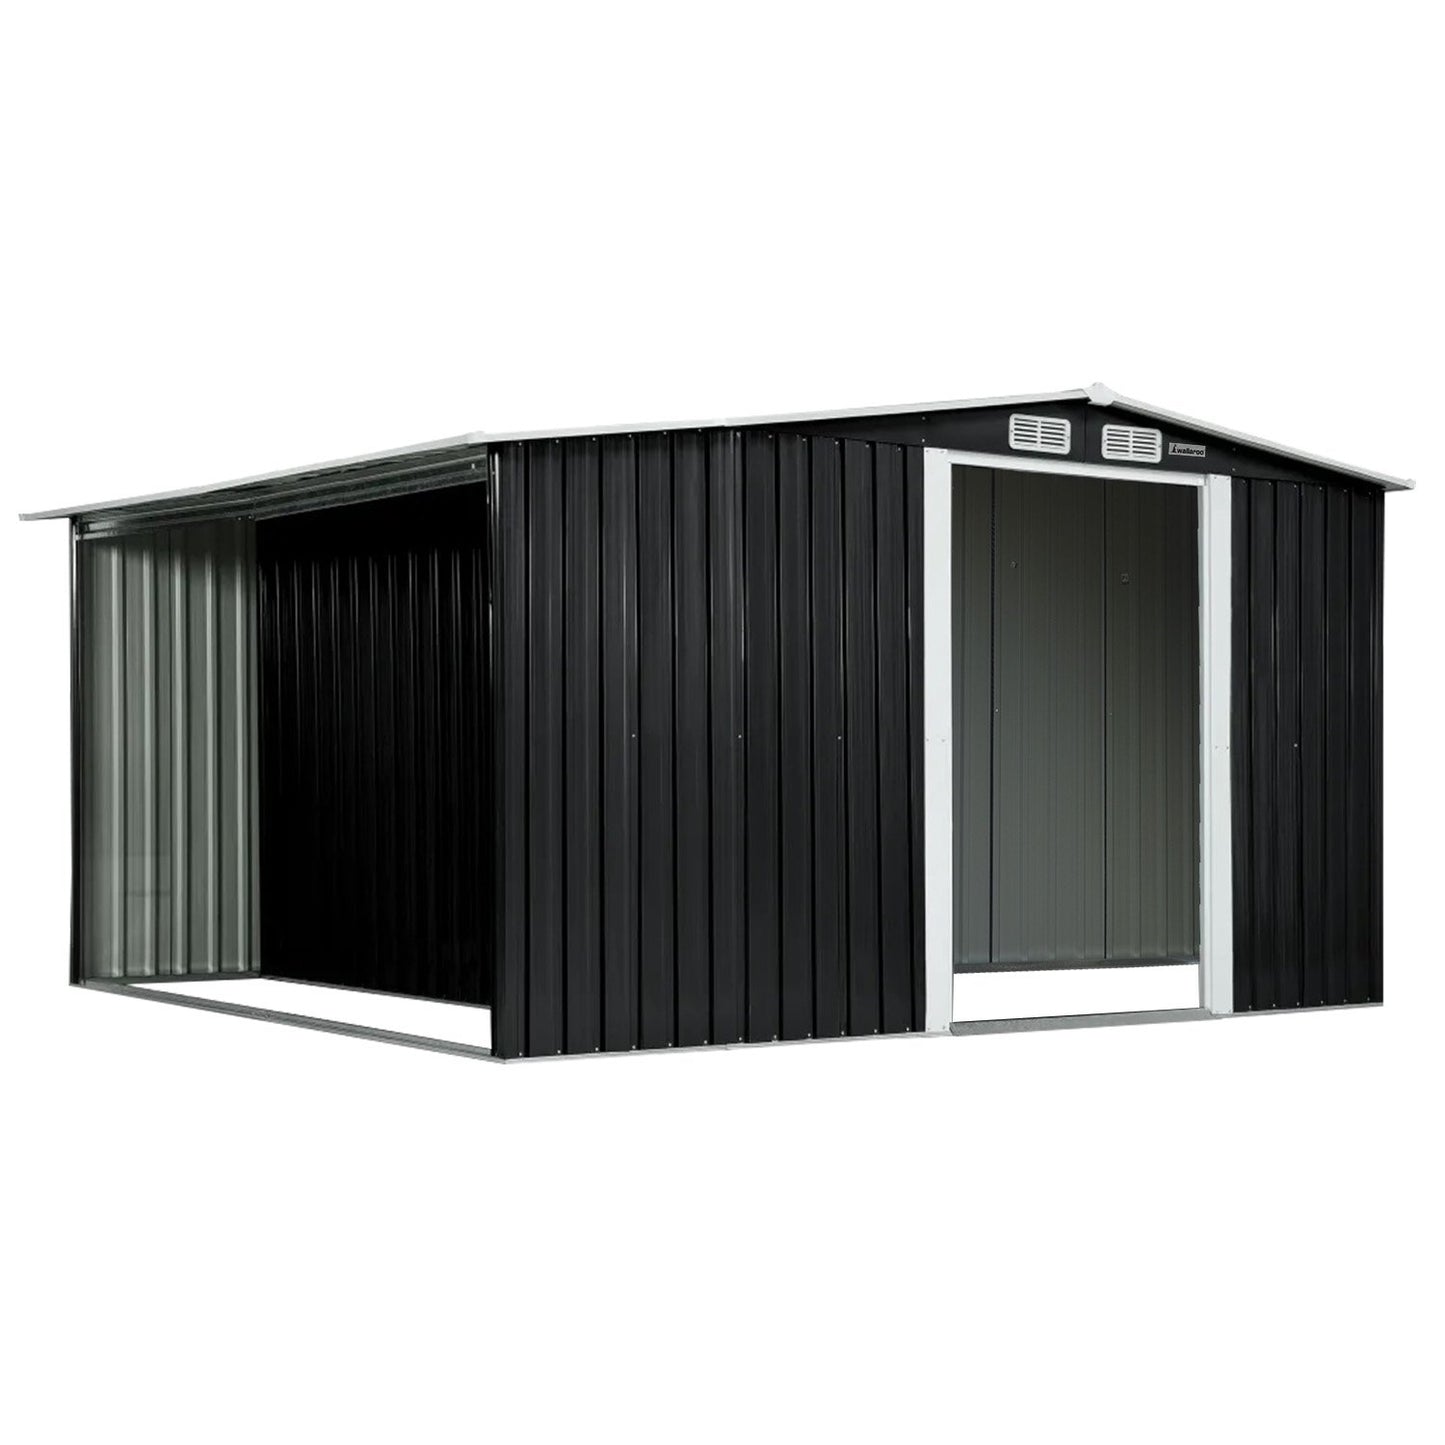 Wallaroo Garden Shed with Semi-Closed Storage 8*8FT - Black Conch Outdoors